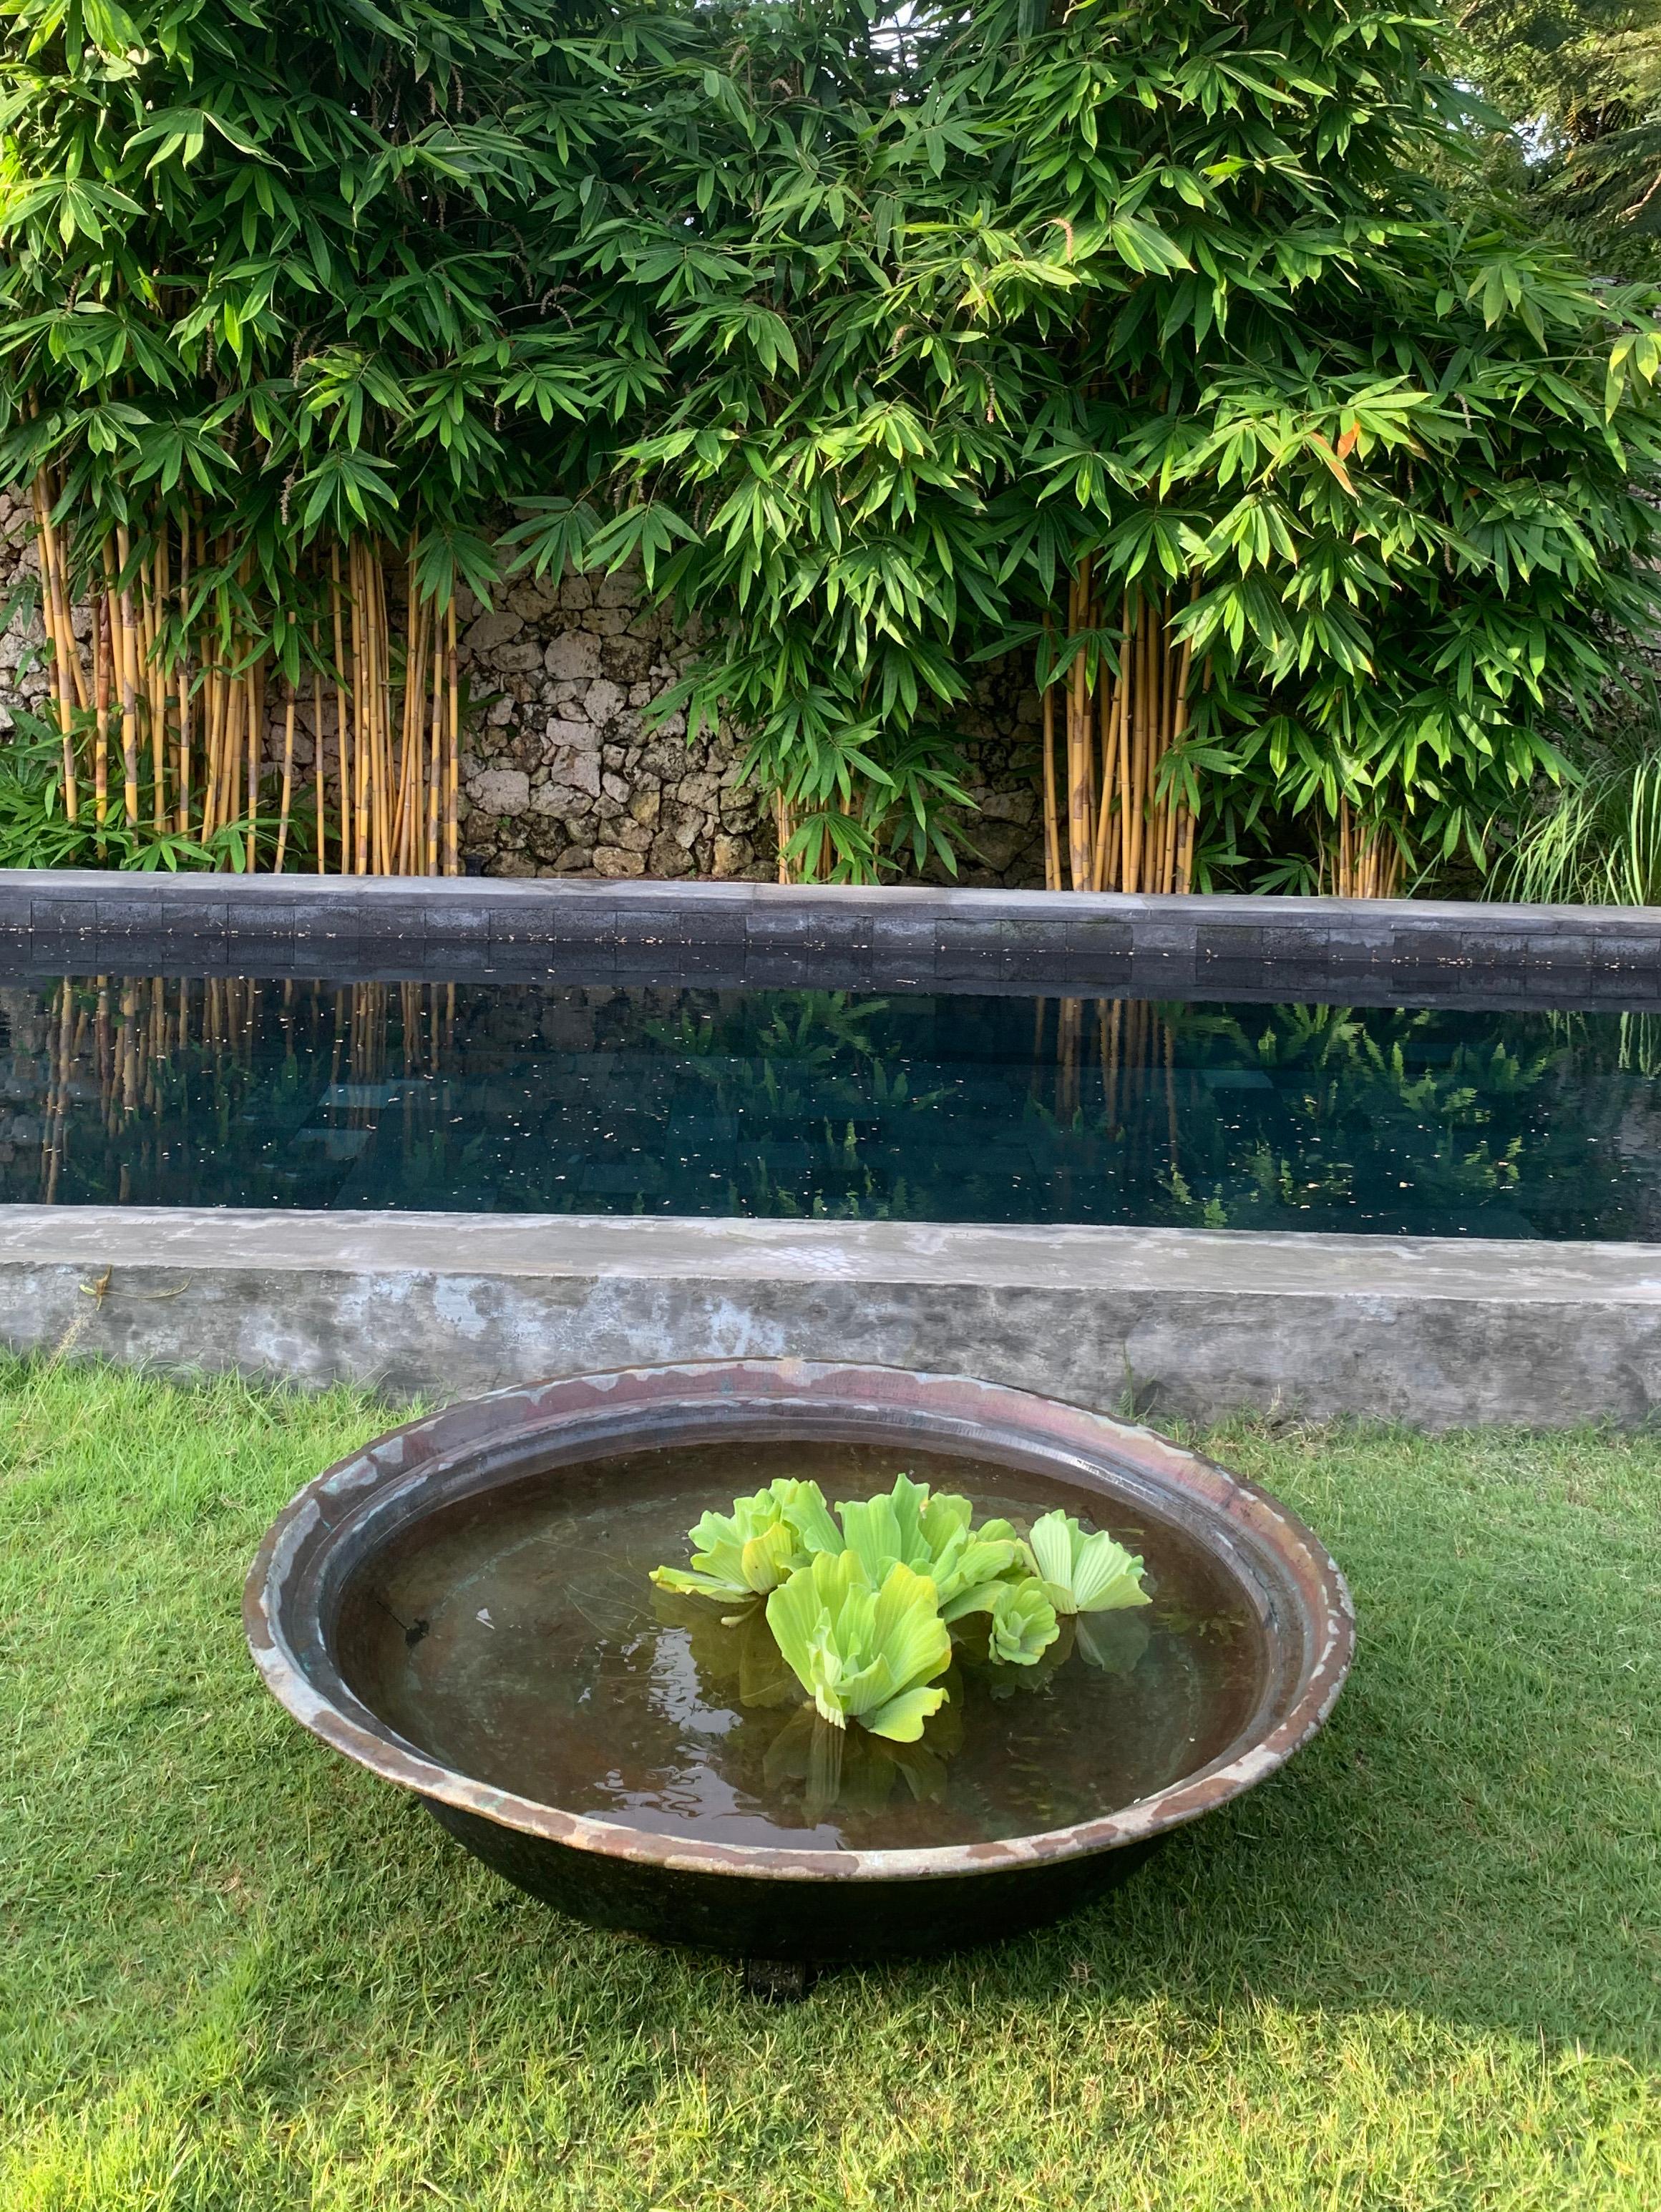 This hand-hewn bronze bowl was once used to keep batik textile dyes on the island of Java. A wonderfully sculptural object with a weathered faded texture. In the modern day this makes for a wonderfully spacious planter or garden water bowl.